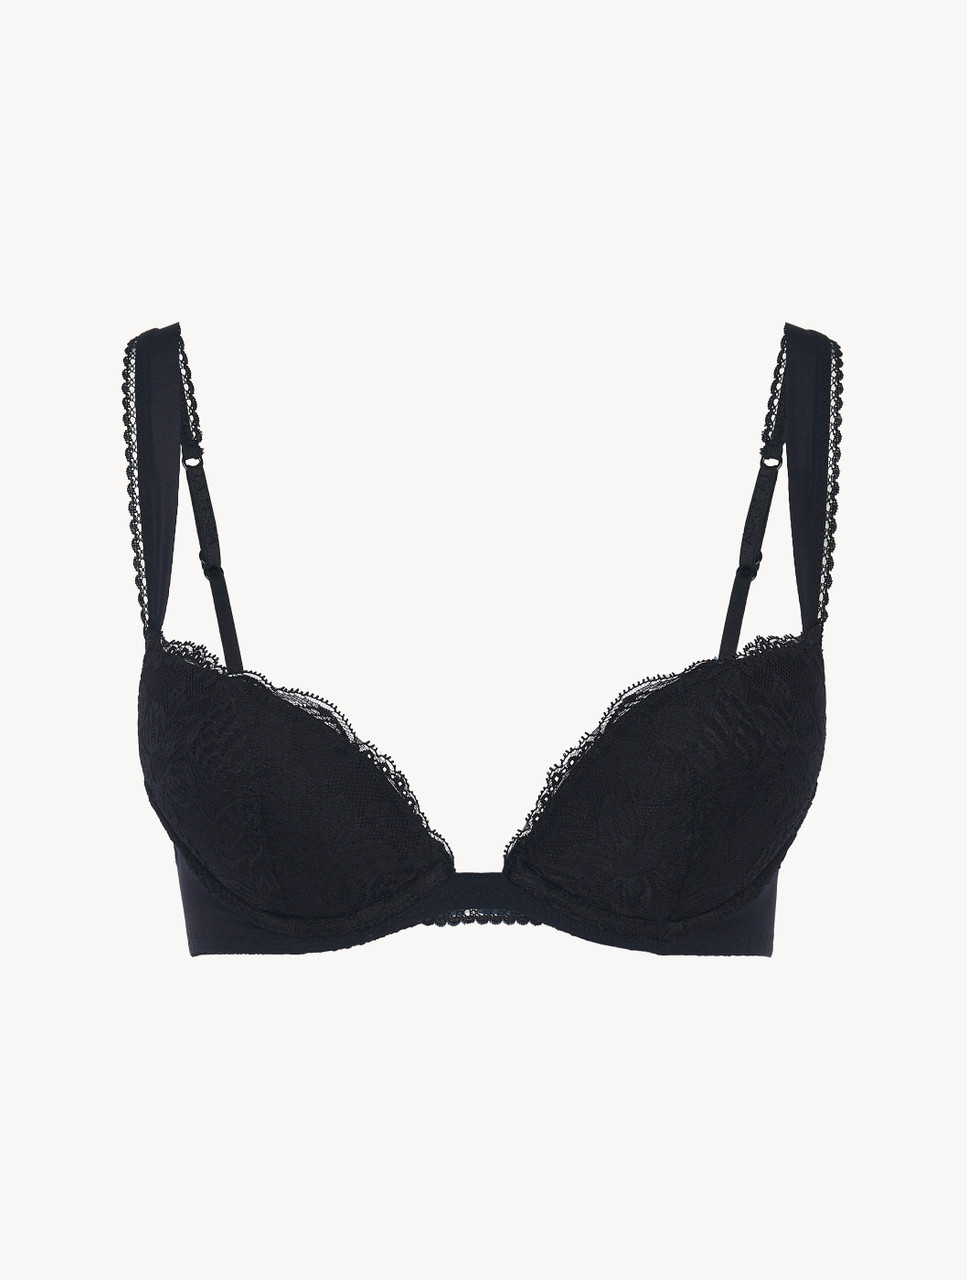 Padded push-up Bra in black Lycra with Leavers lace - La Perla - Russia